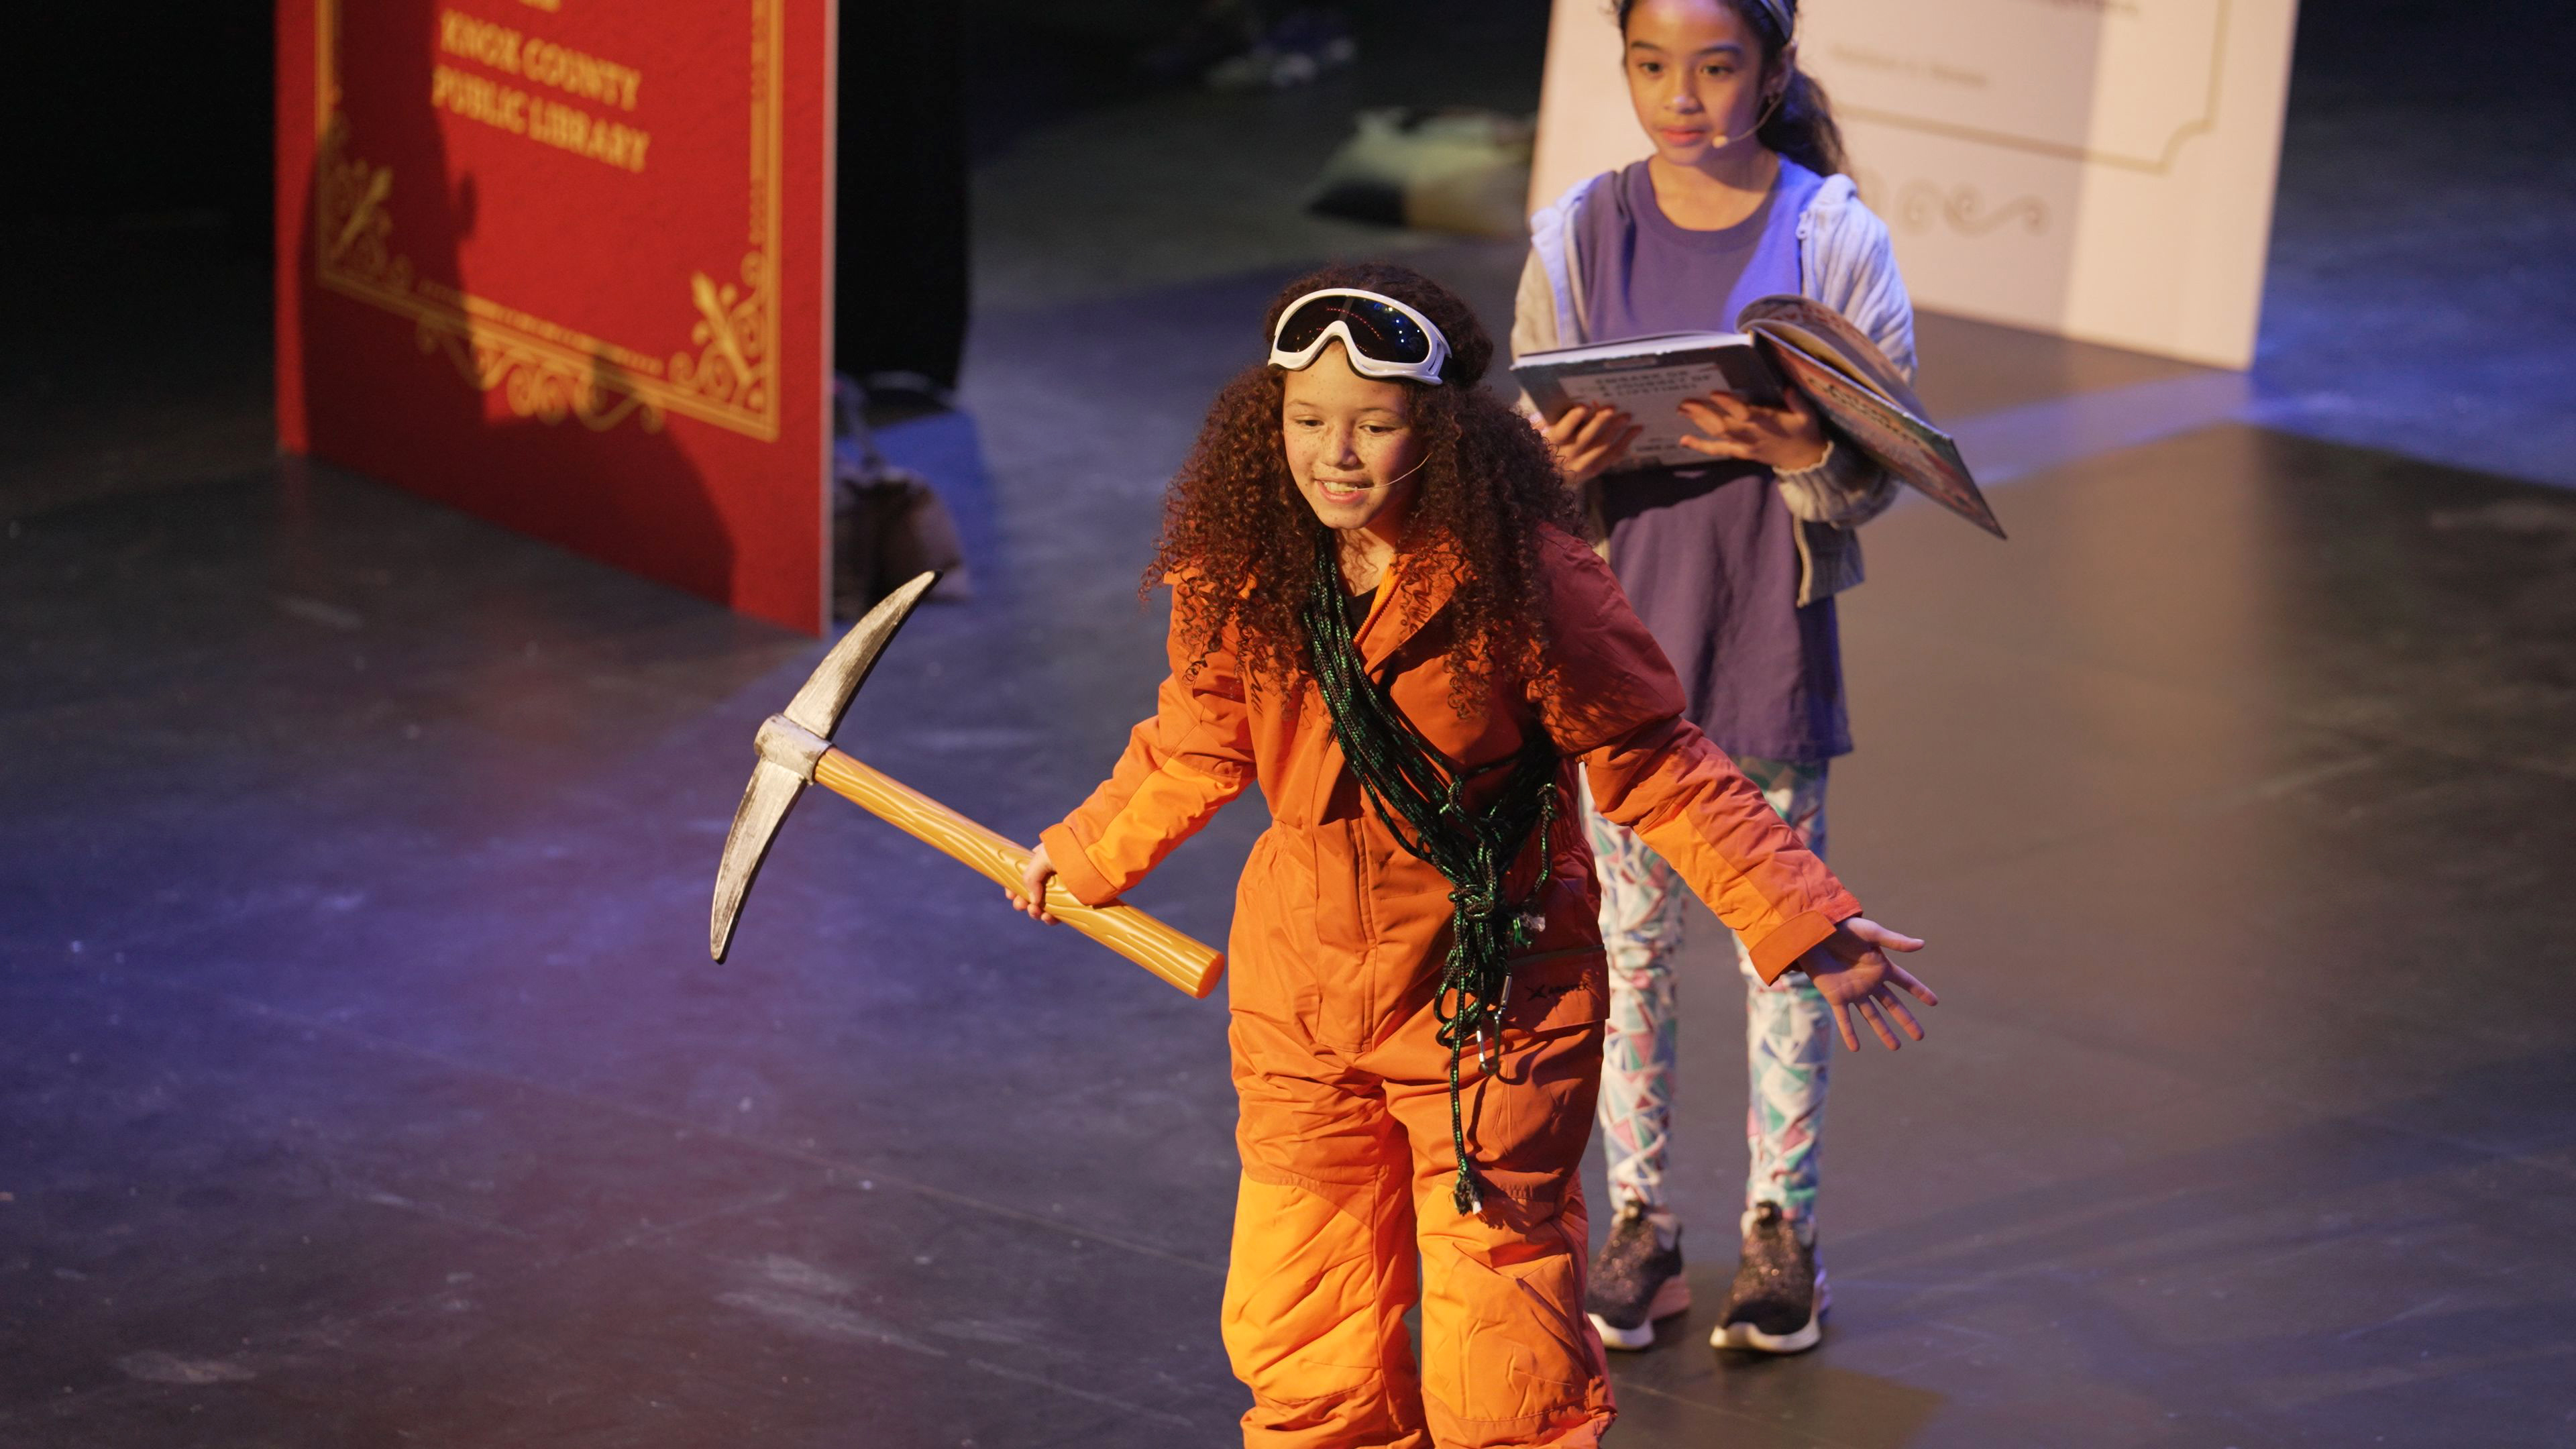 young girl dressed as mountain climber in orange snowsuit and pickaxe